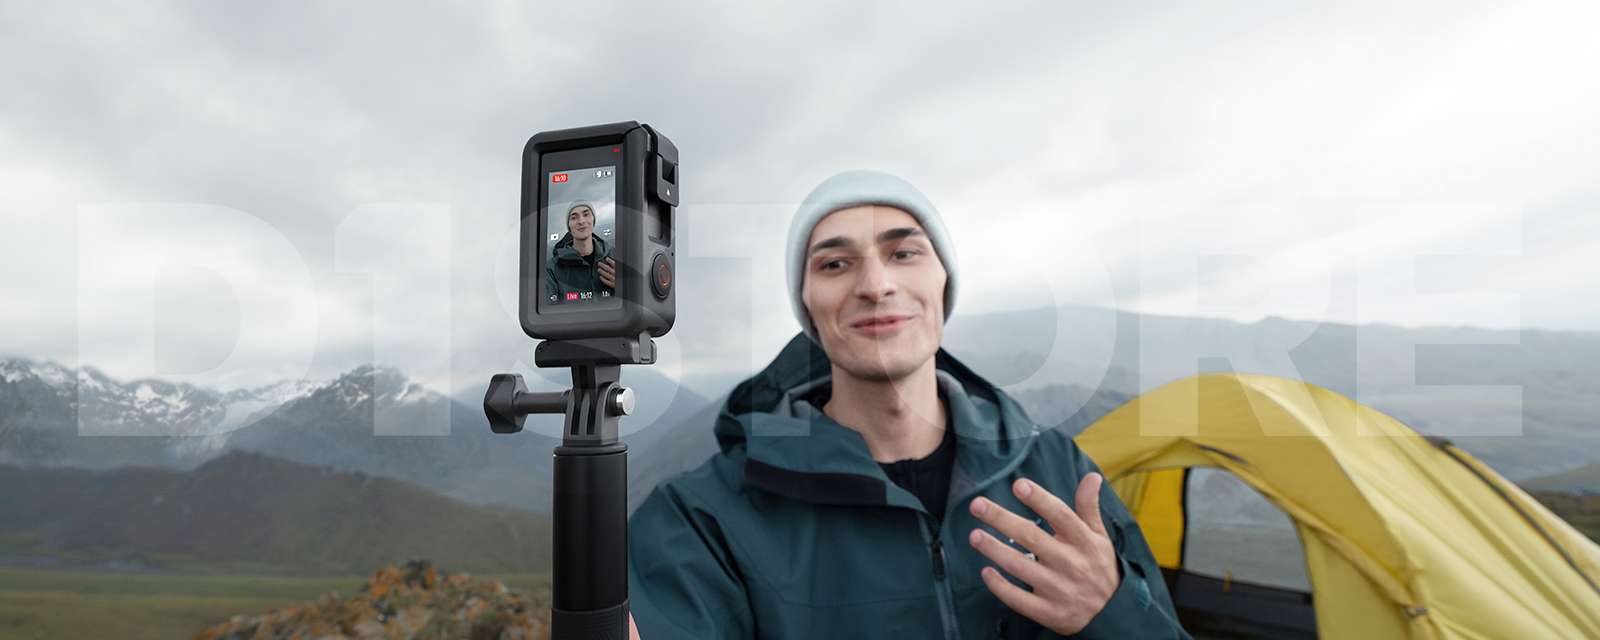 Introducing DJI Osmo Action 3: Adventure Beyond the Edge | D1 Lounge